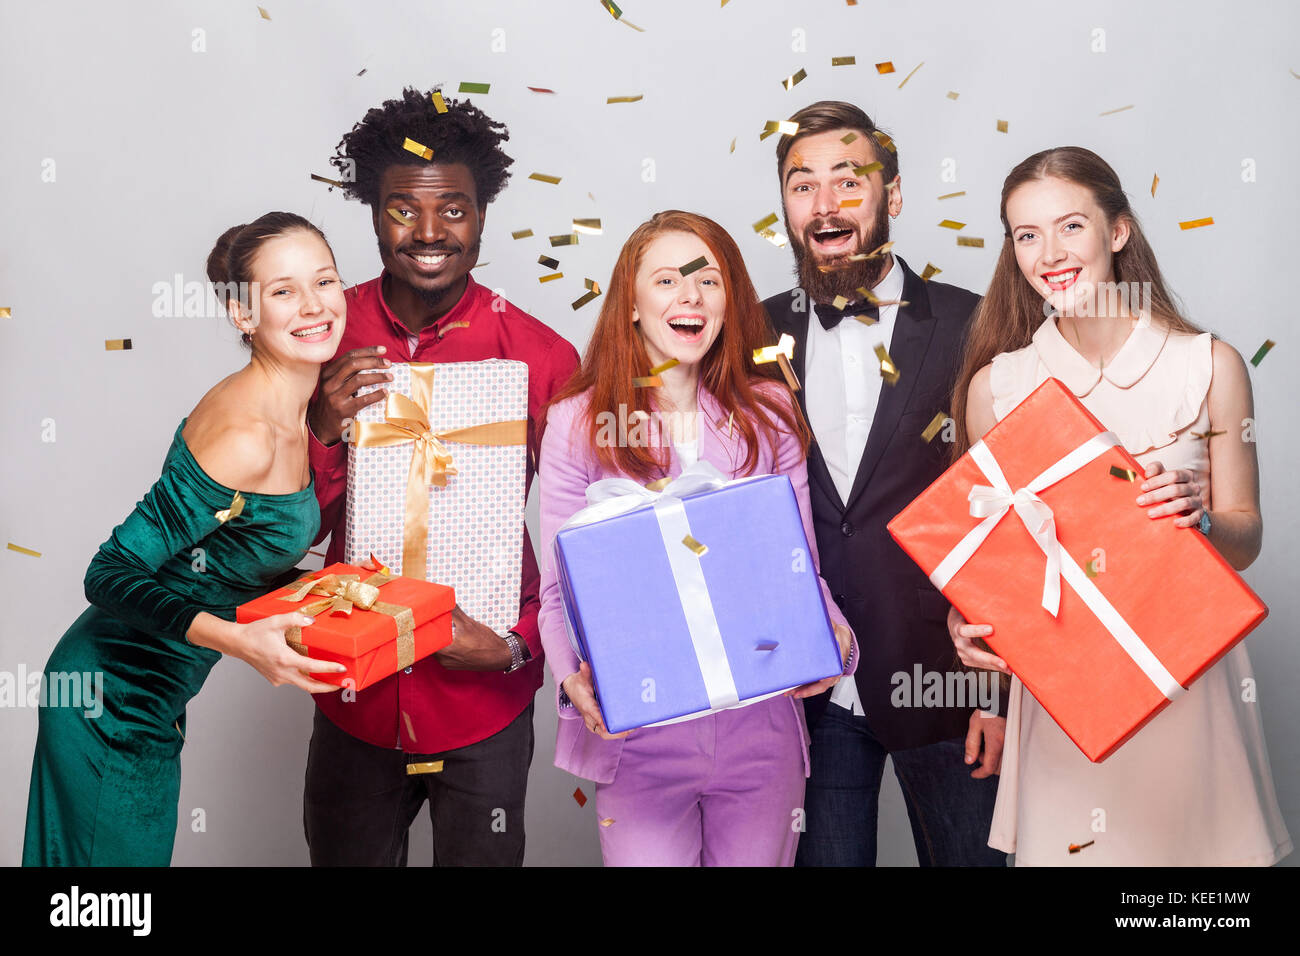 Attractive people celebrating new year. Holding many gift box, looking at camera and toothy smiling. Studio shot on gray background Stock Photo